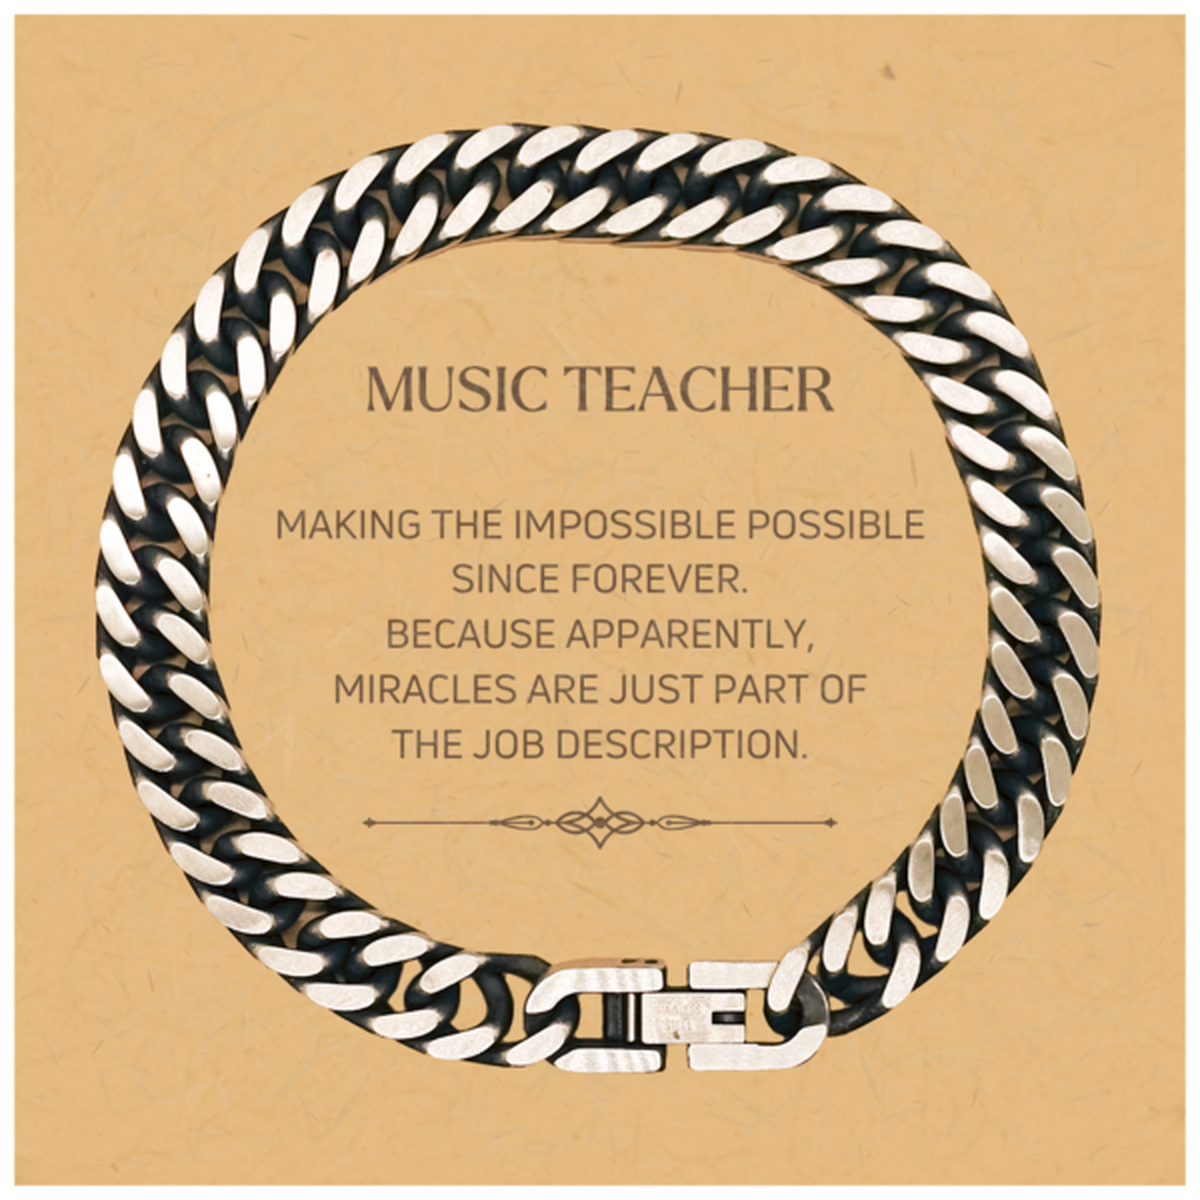 Funny Music Teacher Gifts, Miracles are just part of the job description, Inspirational Birthday Christmas Cuban Link Chain Bracelet For Music Teacher, Men, Women, Coworkers, Friends, Boss